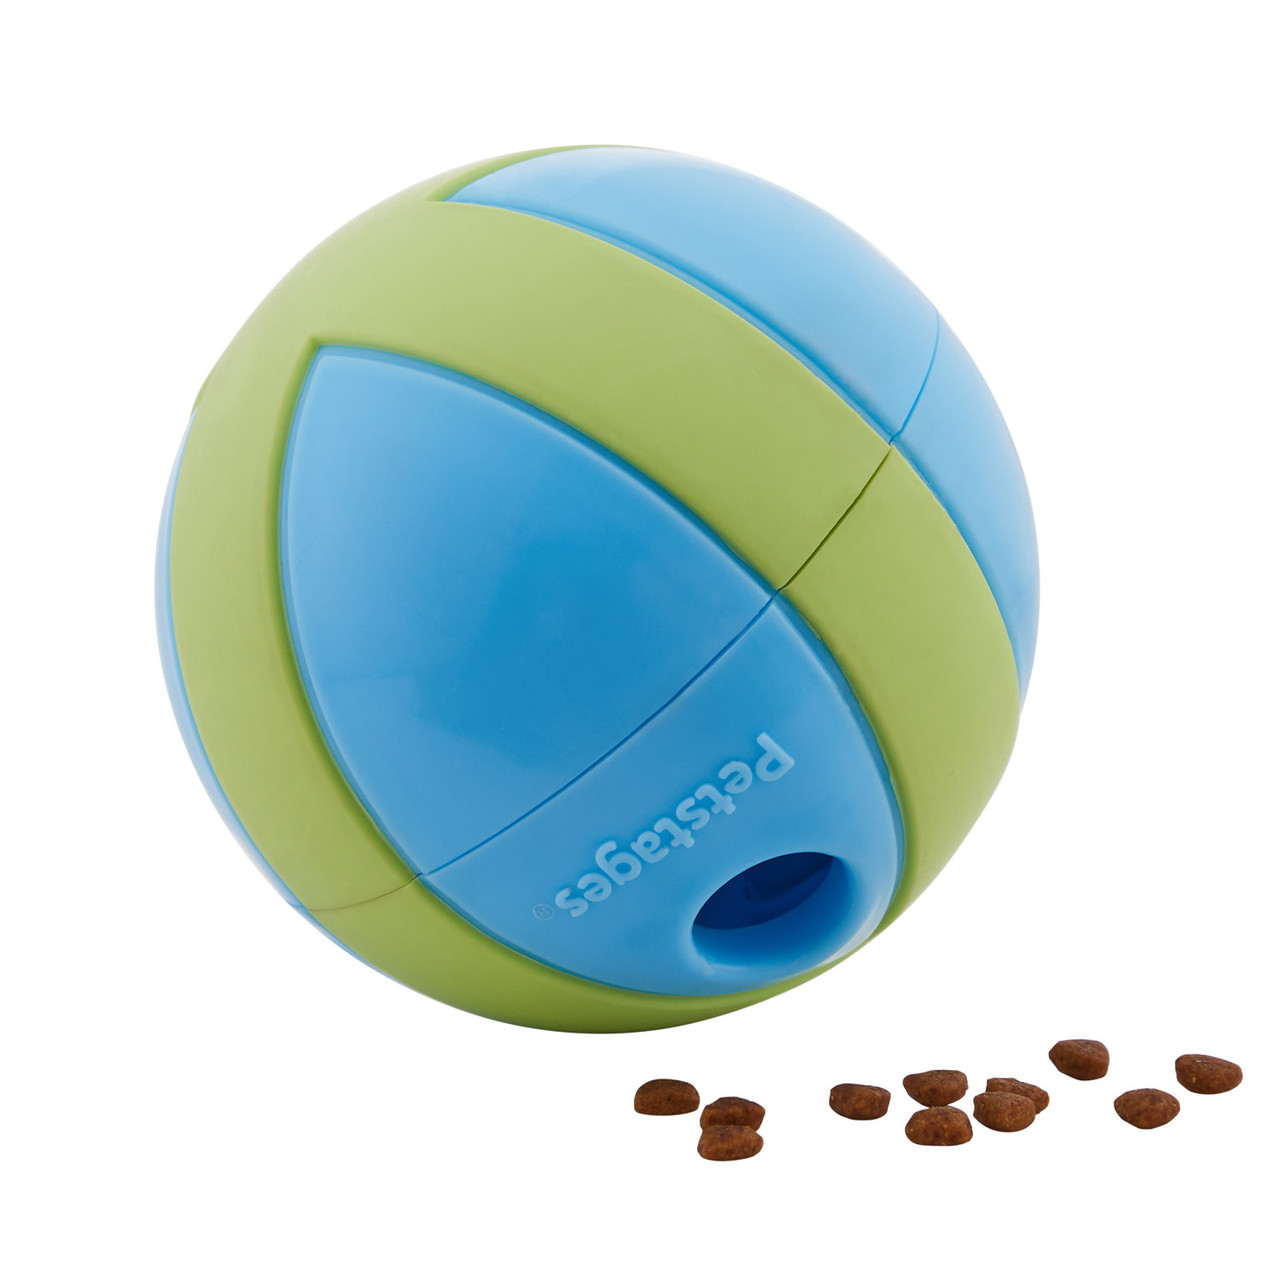 what to put in dog treat ball